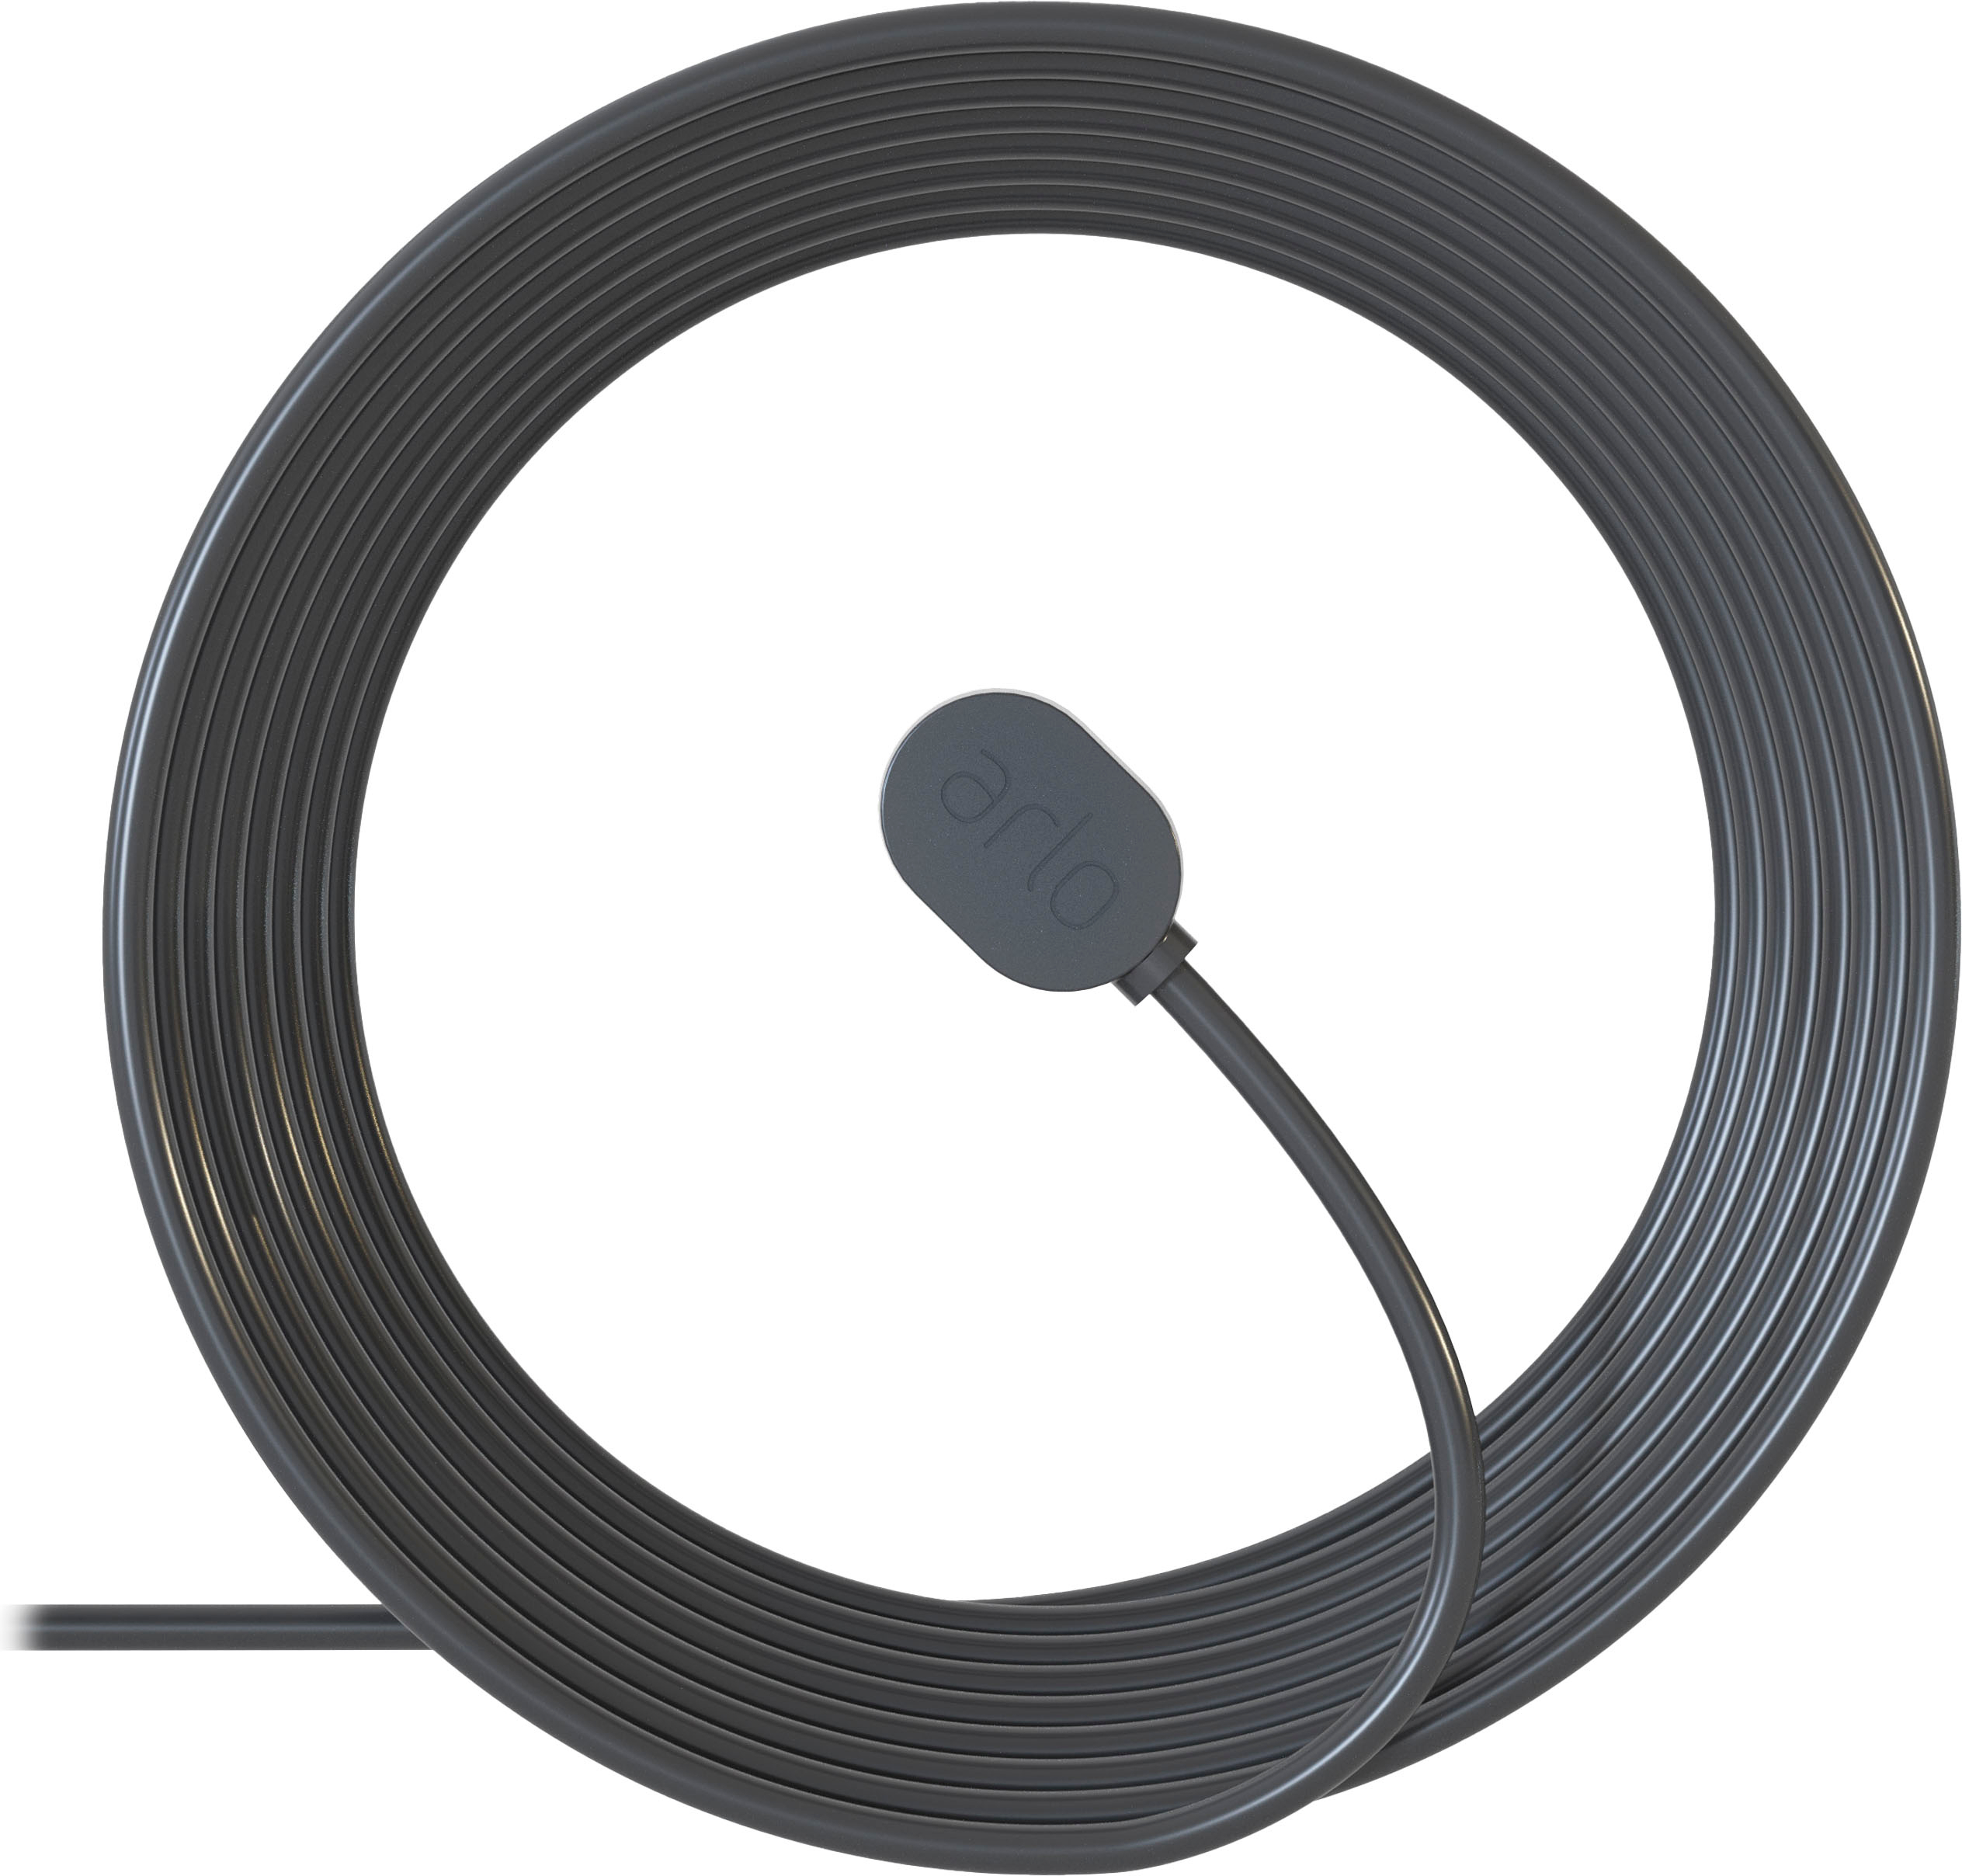 Arlo 25' Outdoor Magnetic Charging Cable Arlo Ultra and Pro 3 Security Cameras 